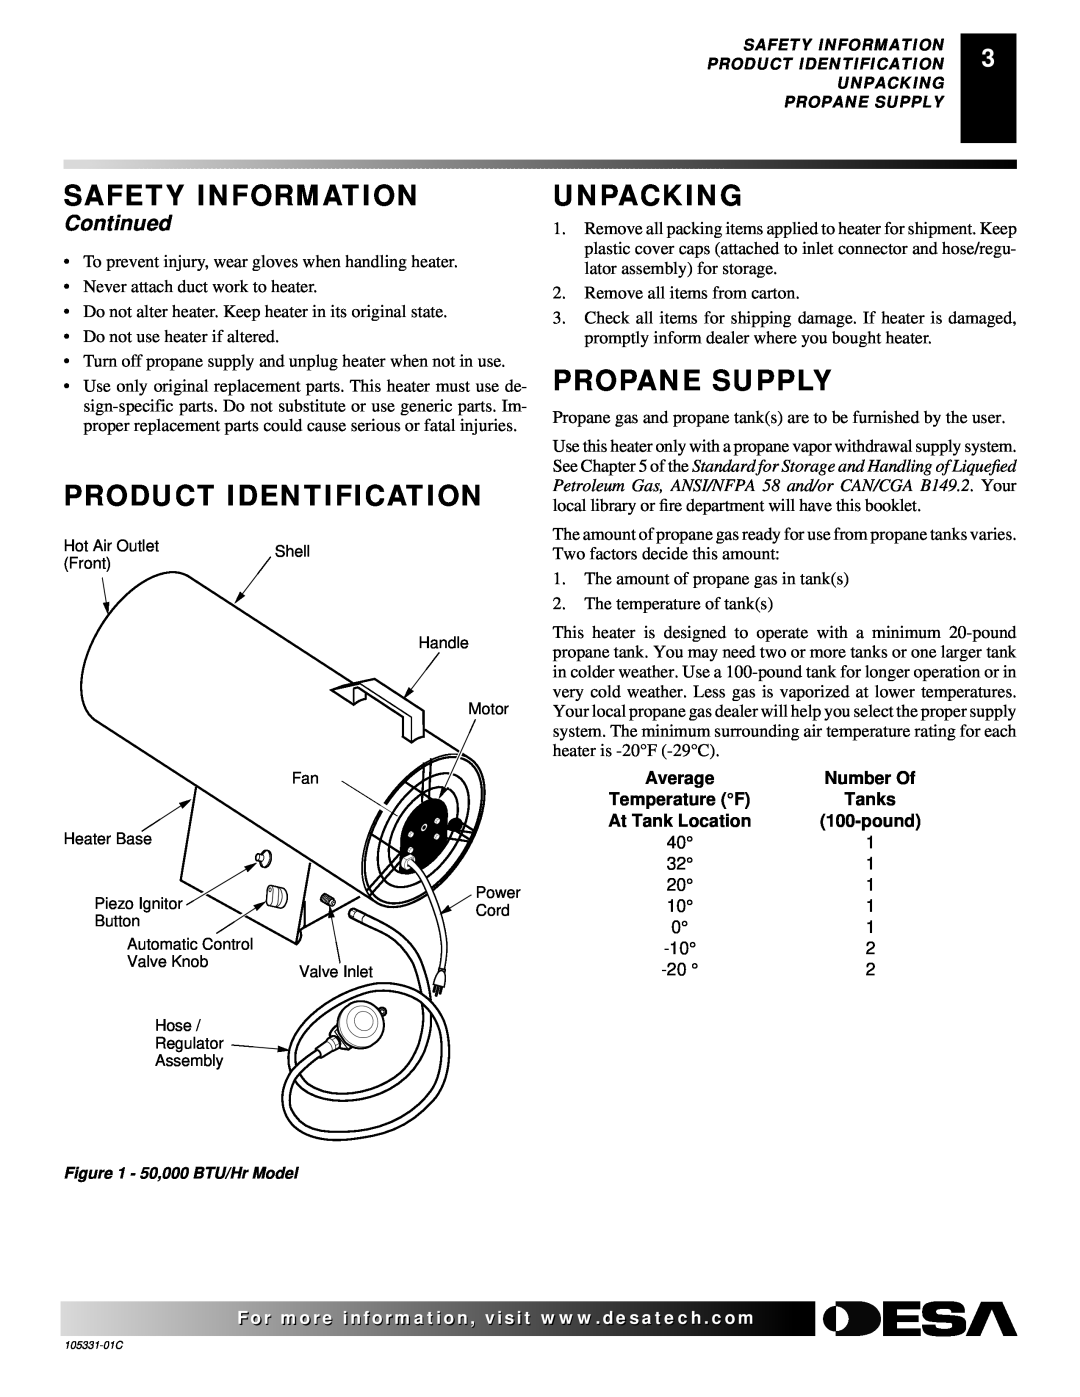 Desa ROPANE CONSTRUCTION HEATER Product Identification, Unpacking, Propane Supply, Continued, Safety Information, Average 